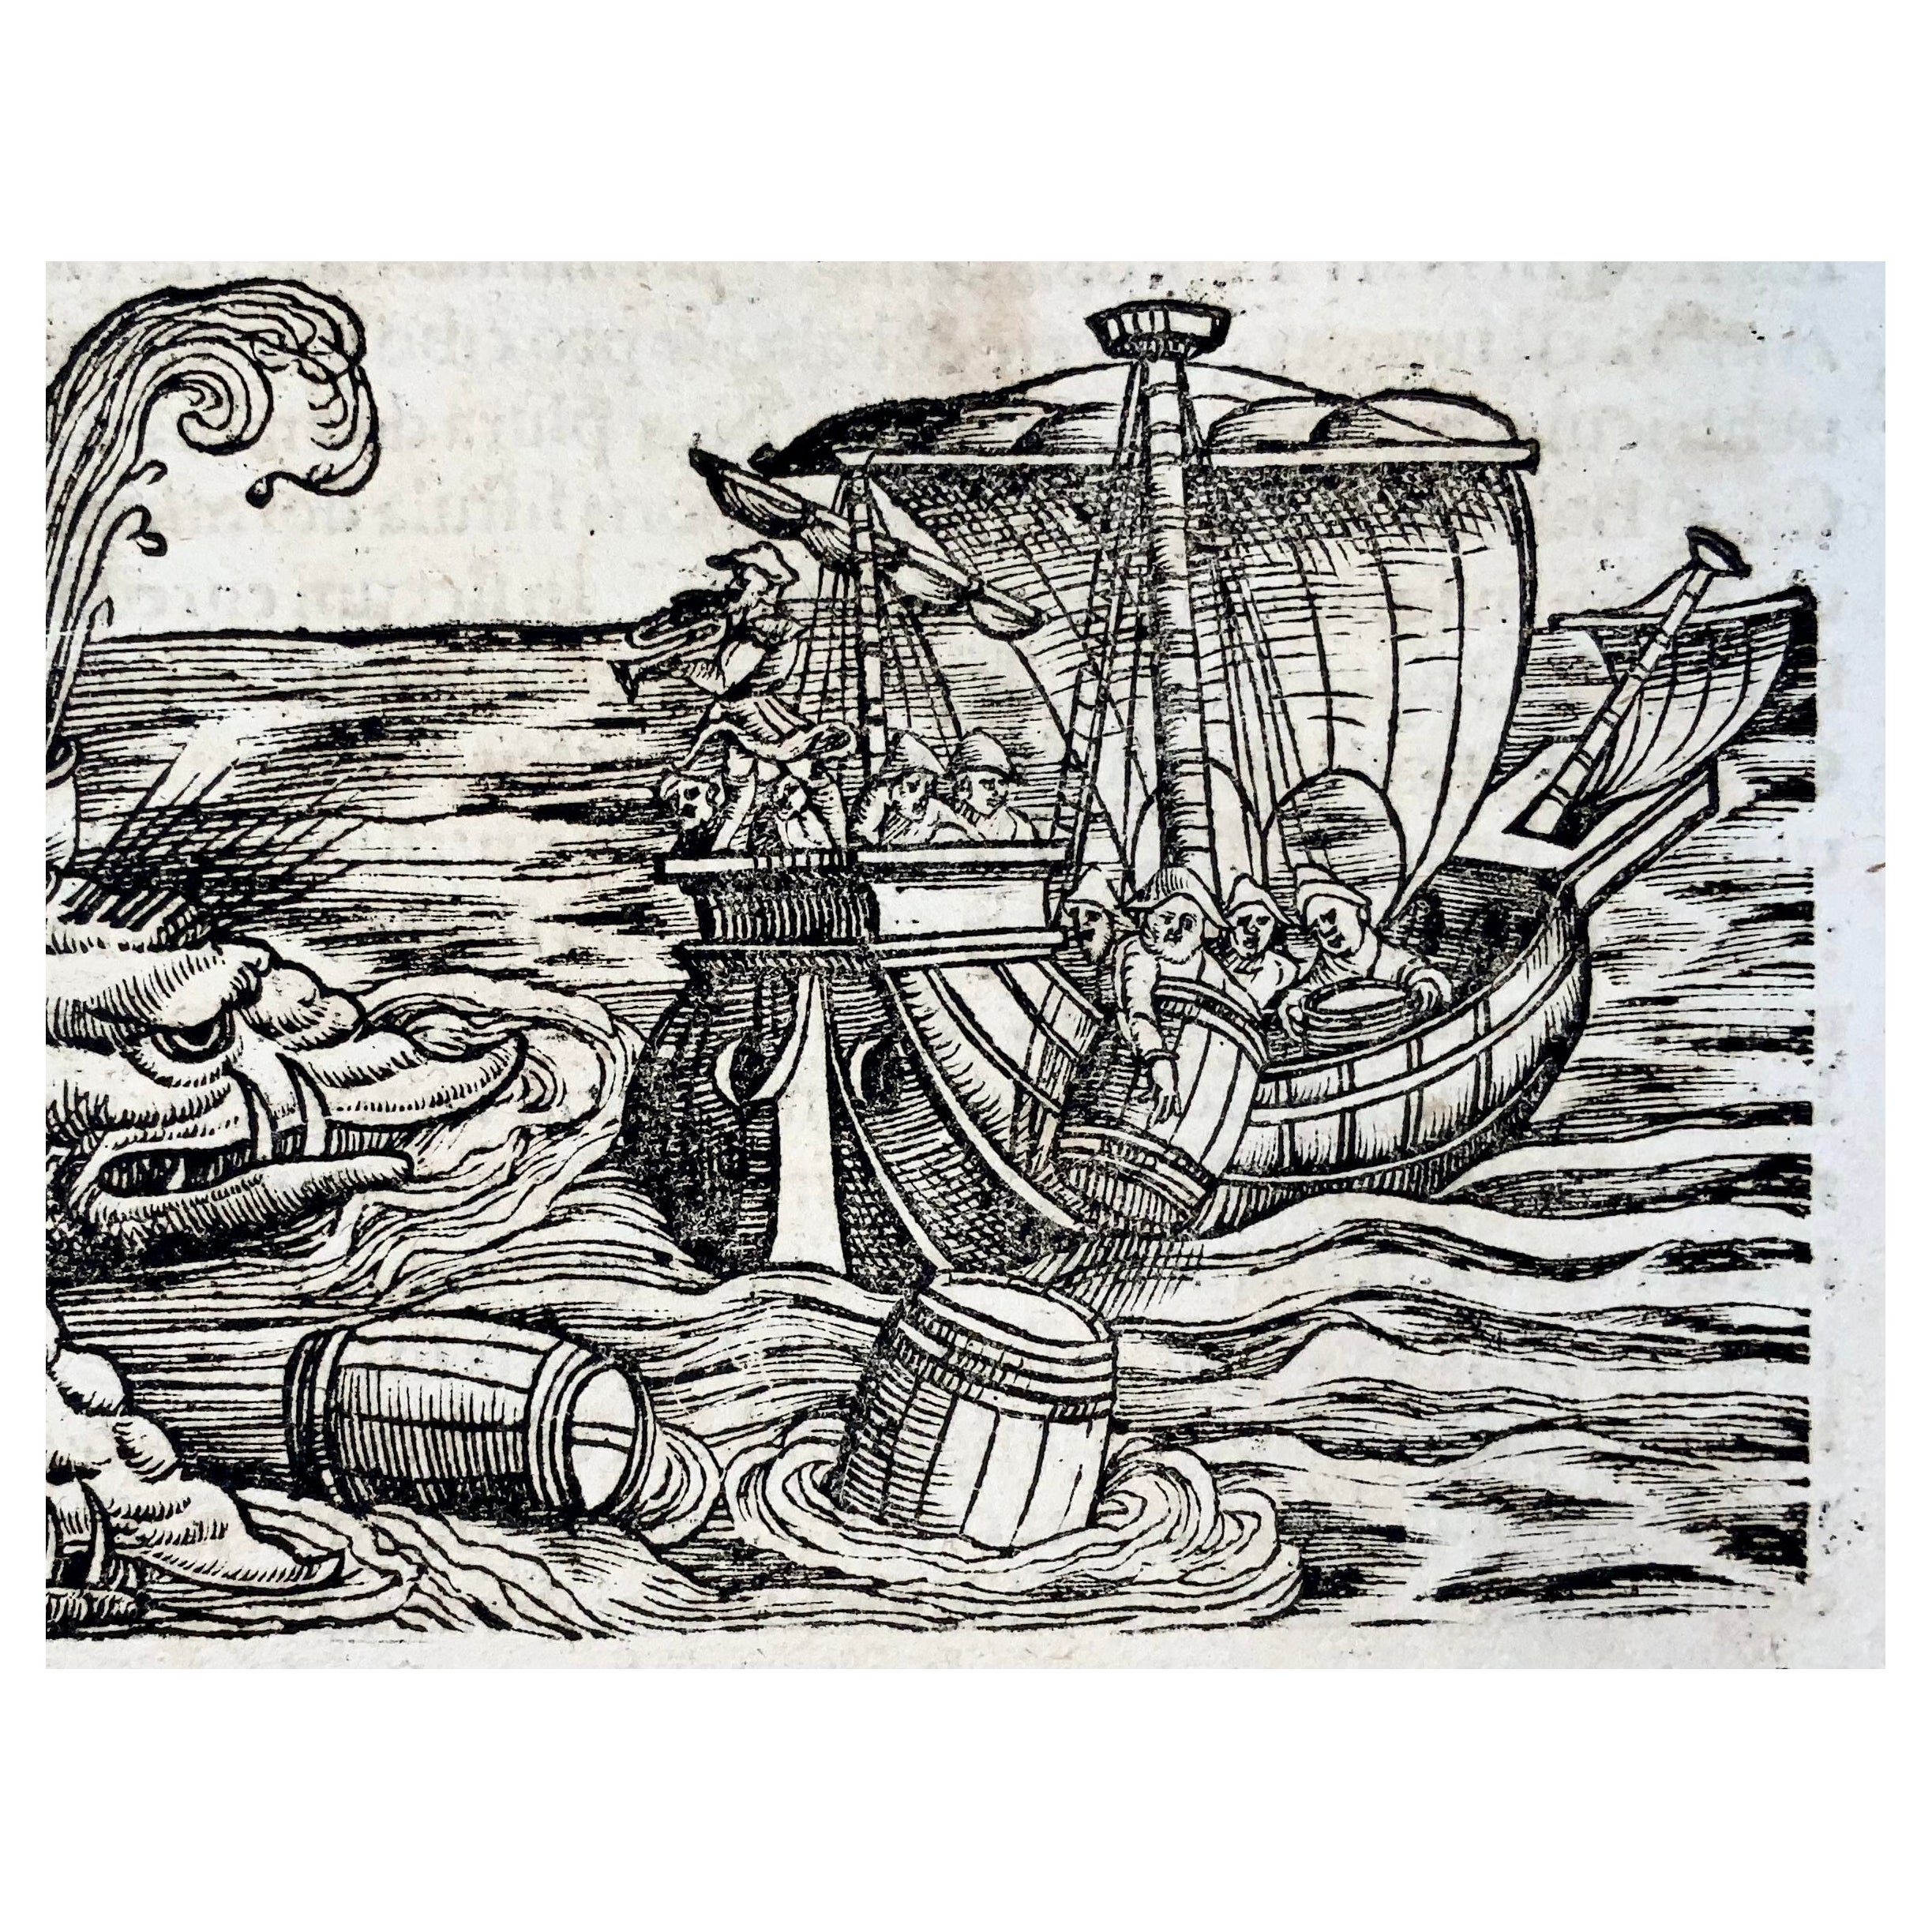 1558 Conrad Gesner, Monstrous Whale Attacks a Sailing Ship, Woodcut Leaf